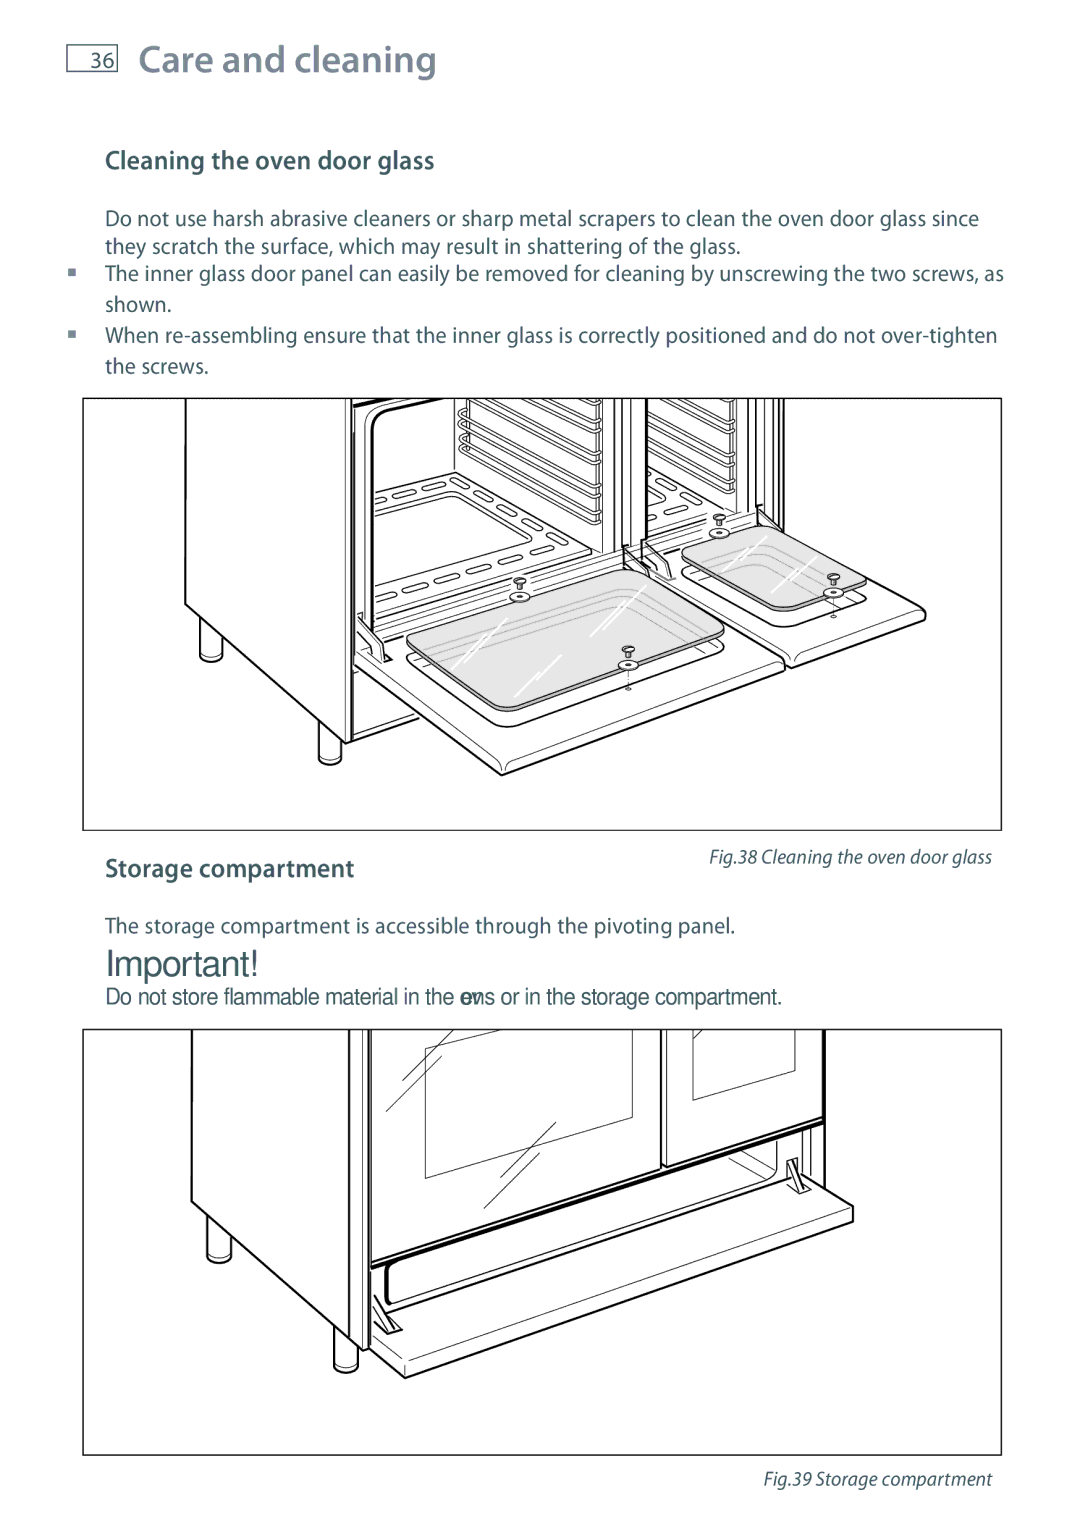 Fisher & Paykel GB IE installation instructions Cleaning the oven door glass, Storage compartment 